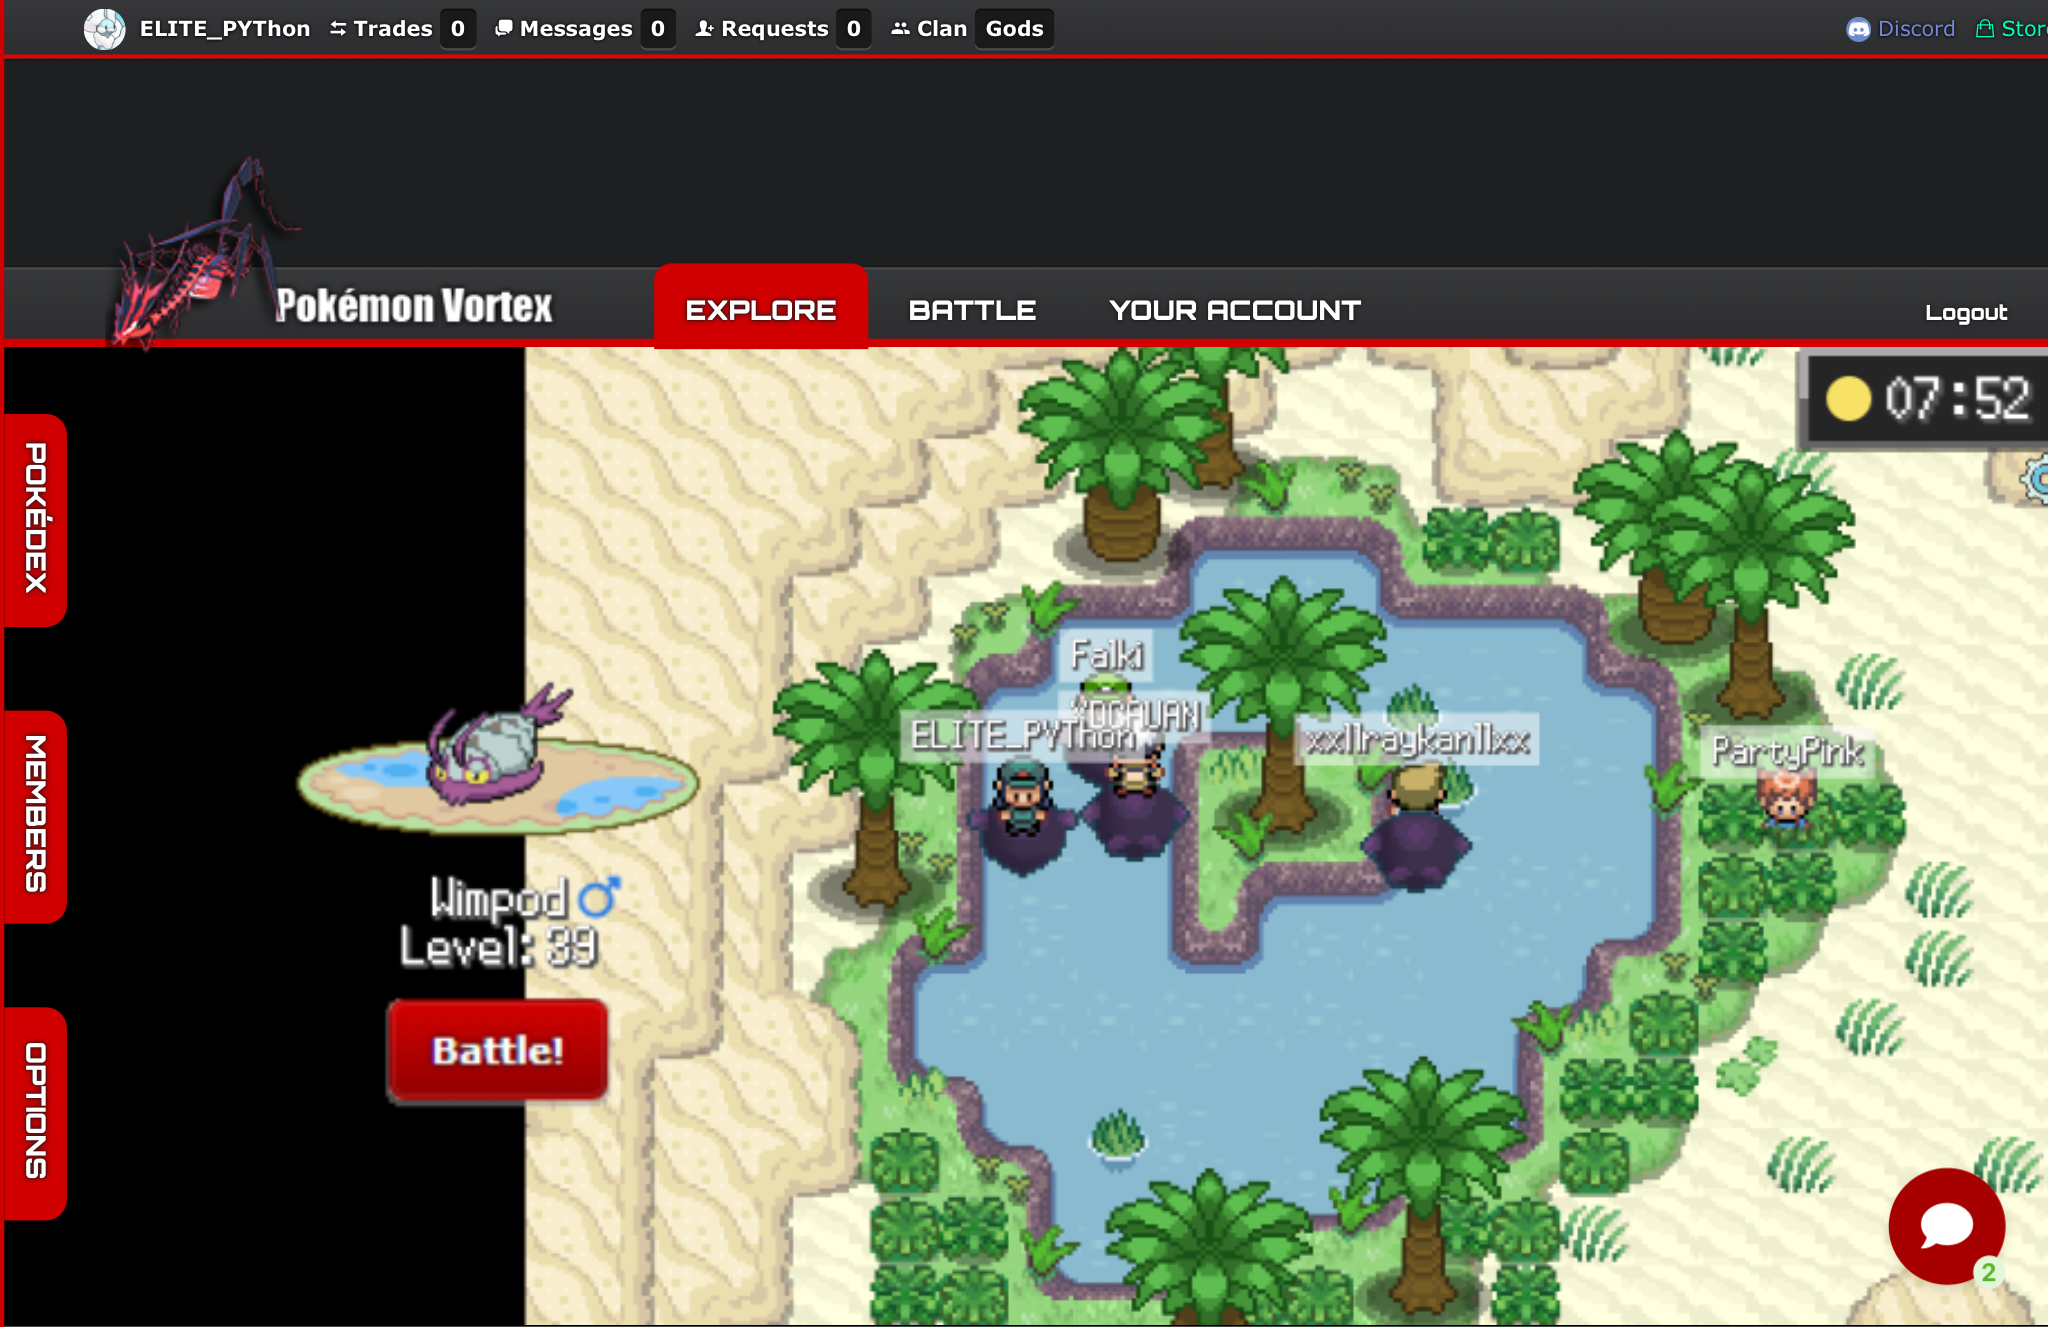 POKEMON VORTEX - HOW TO GO FROM RED RUST CANYON TO NIGHTSHADE WITH